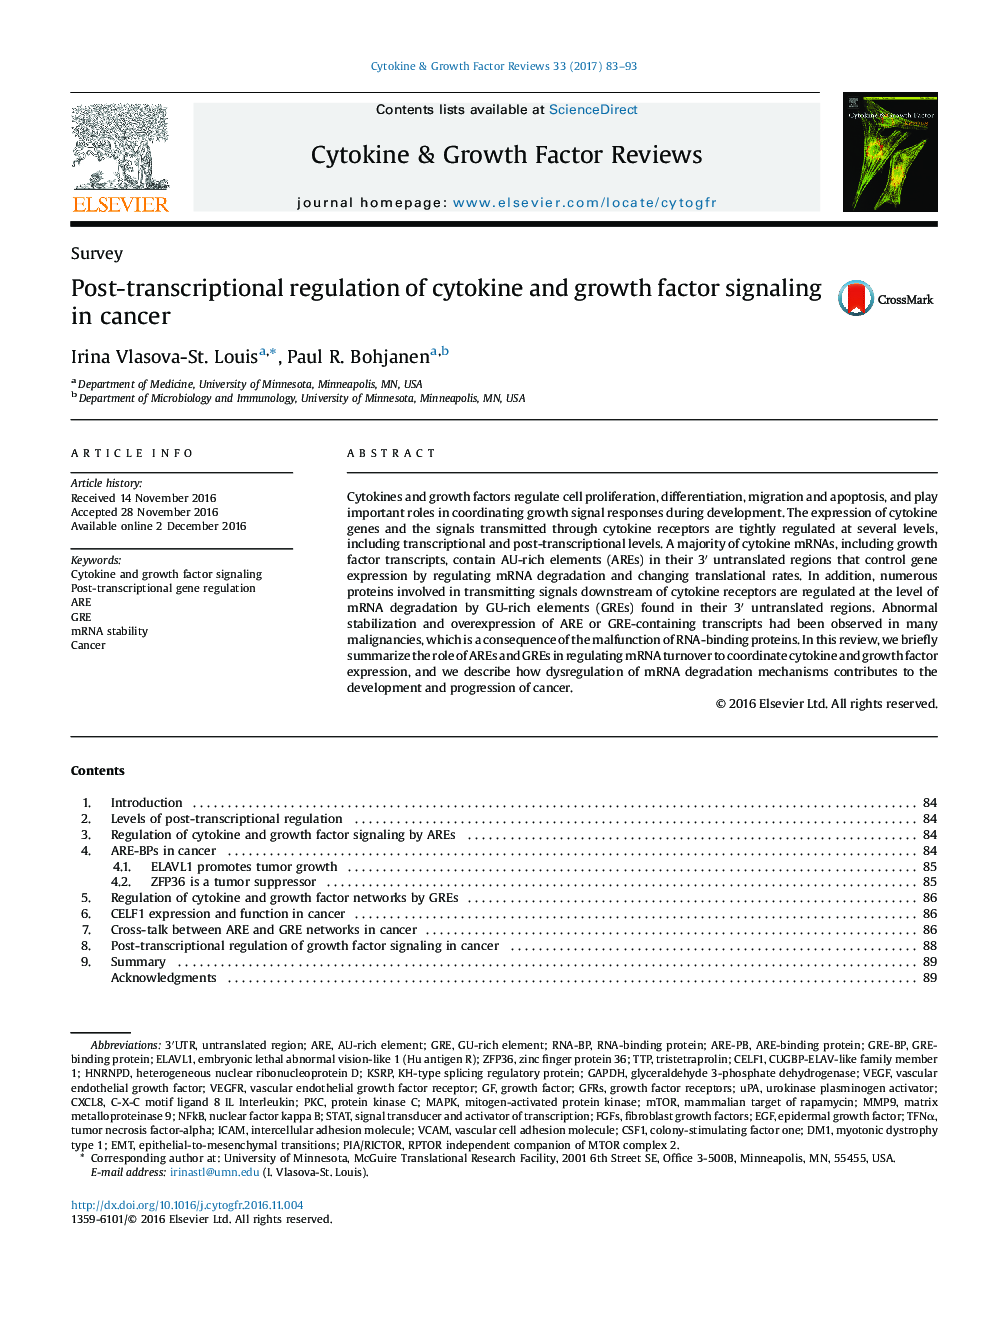 SurveyPost-transcriptional regulation of cytokine and growth factor signaling in cancer